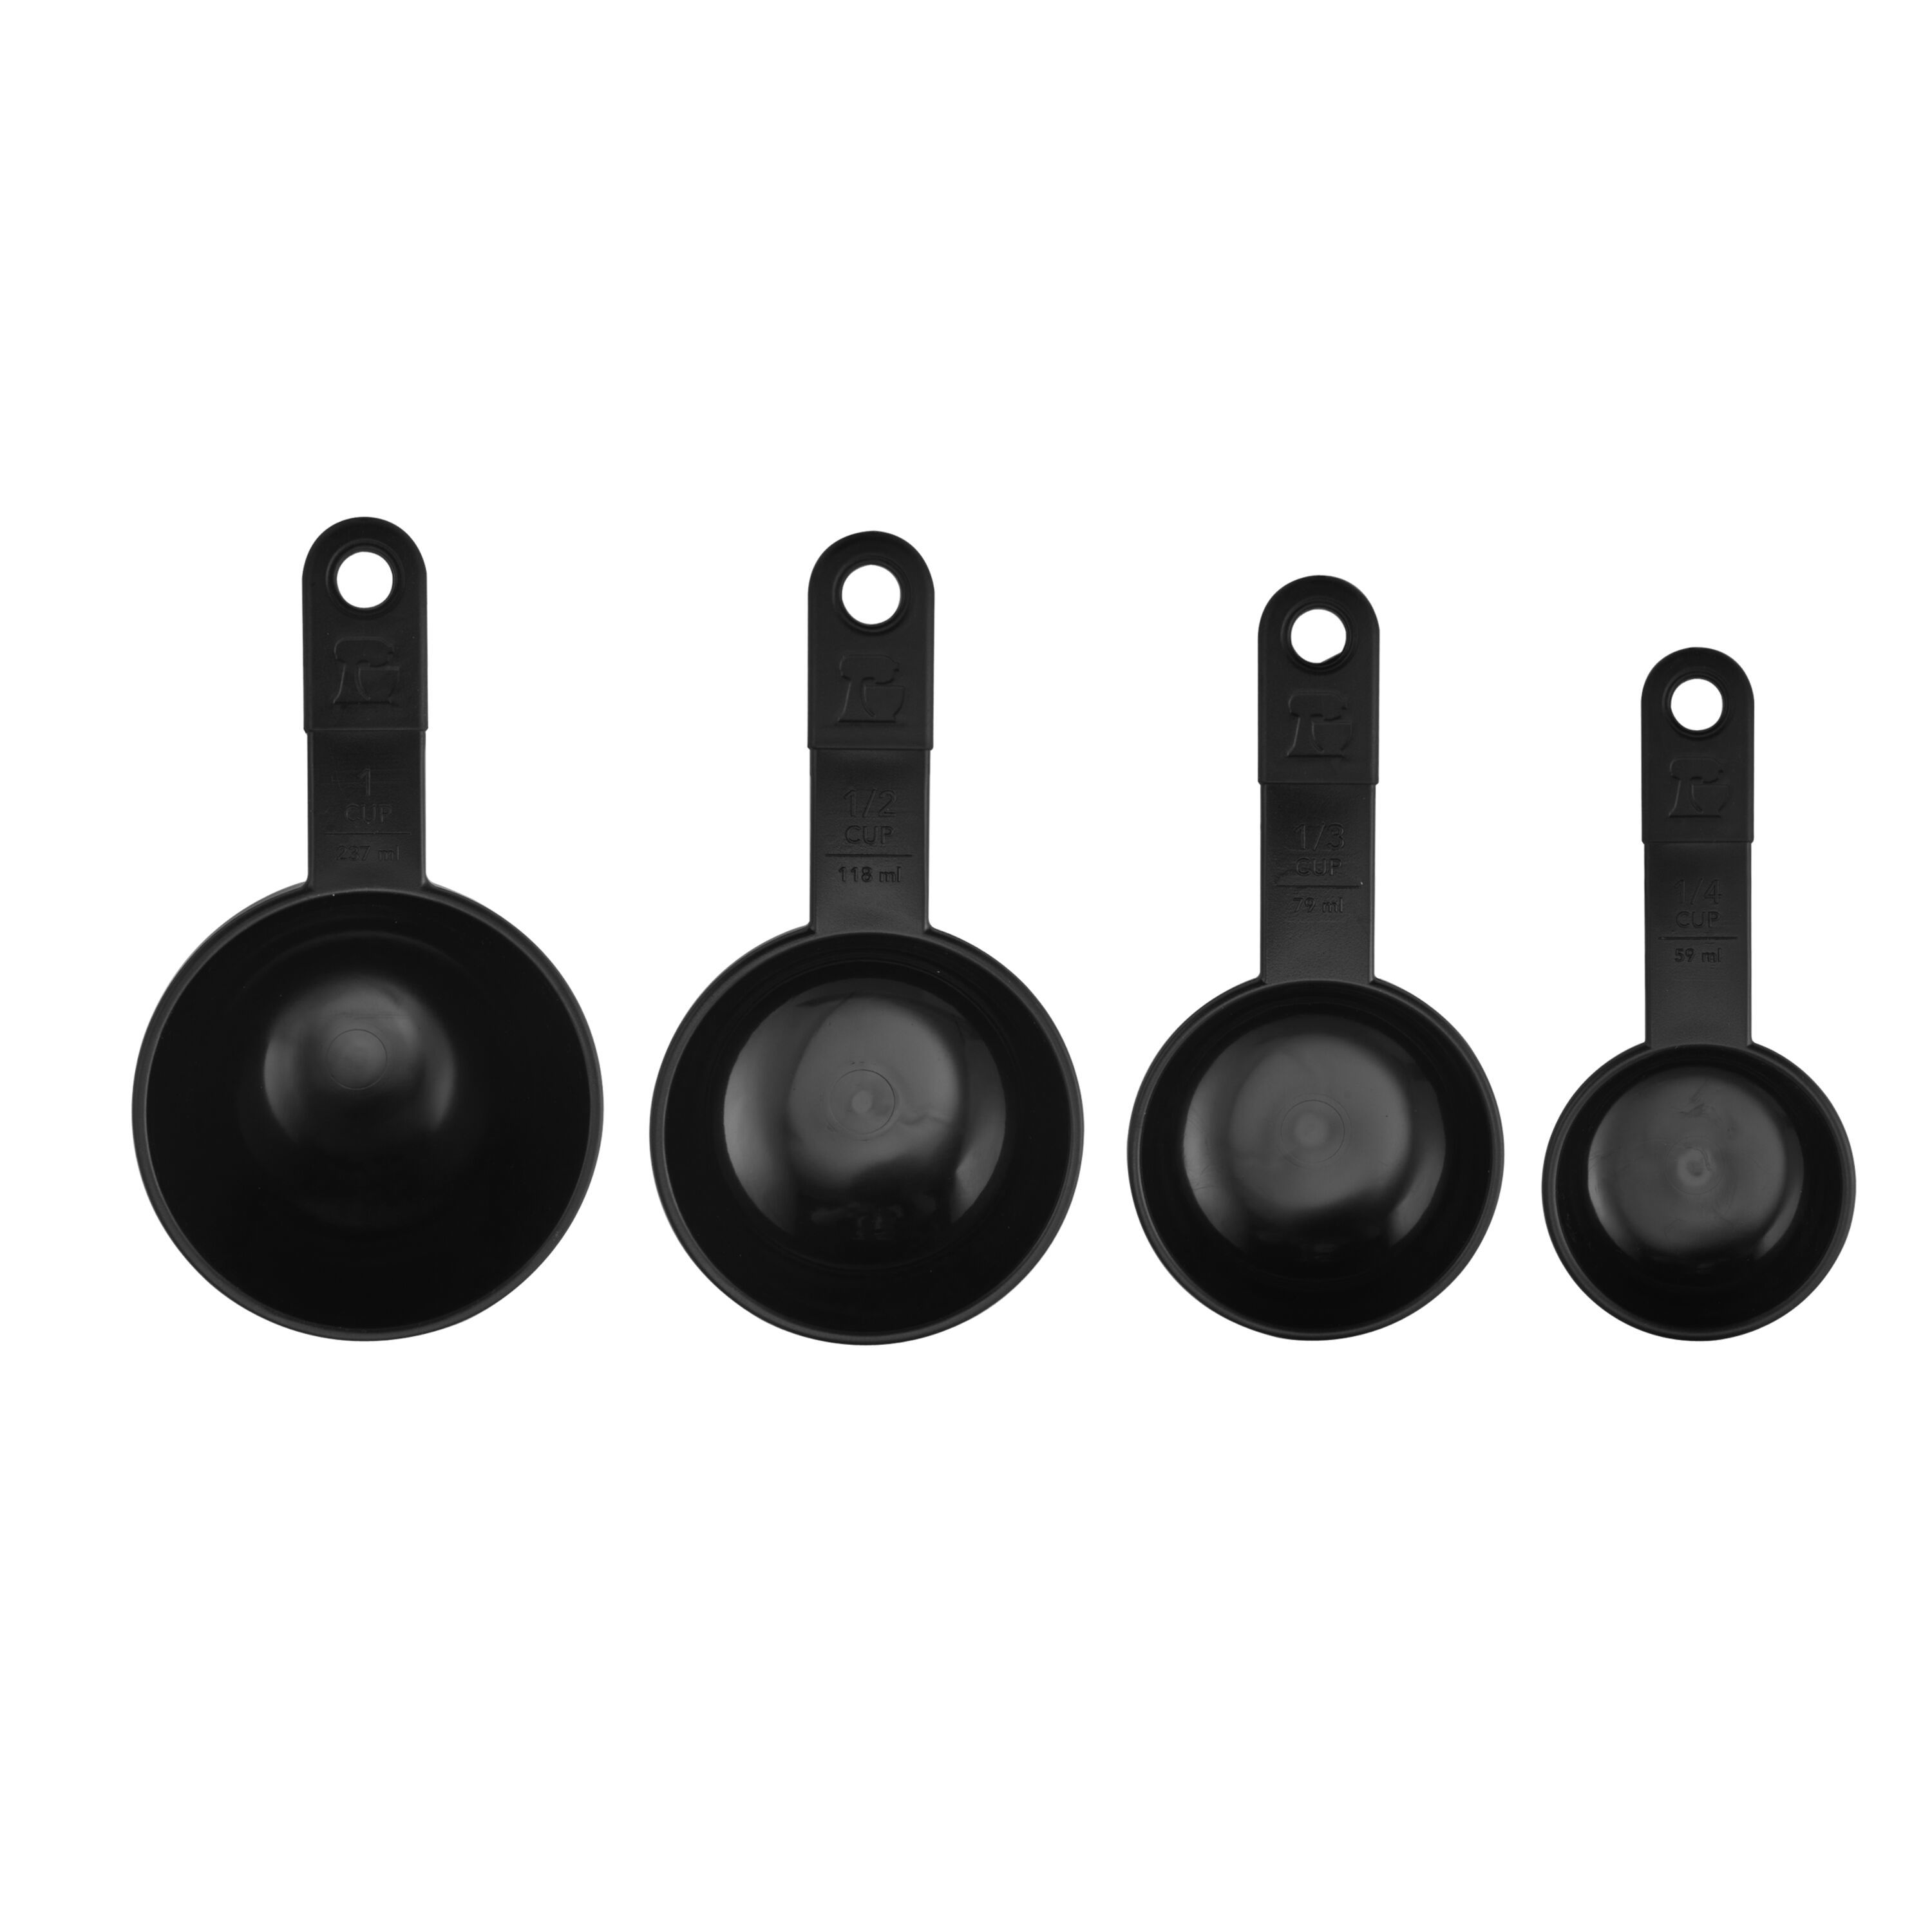 Kitchenaid 15-Piece Tool and Gadget Set in Black - image 4 of 18